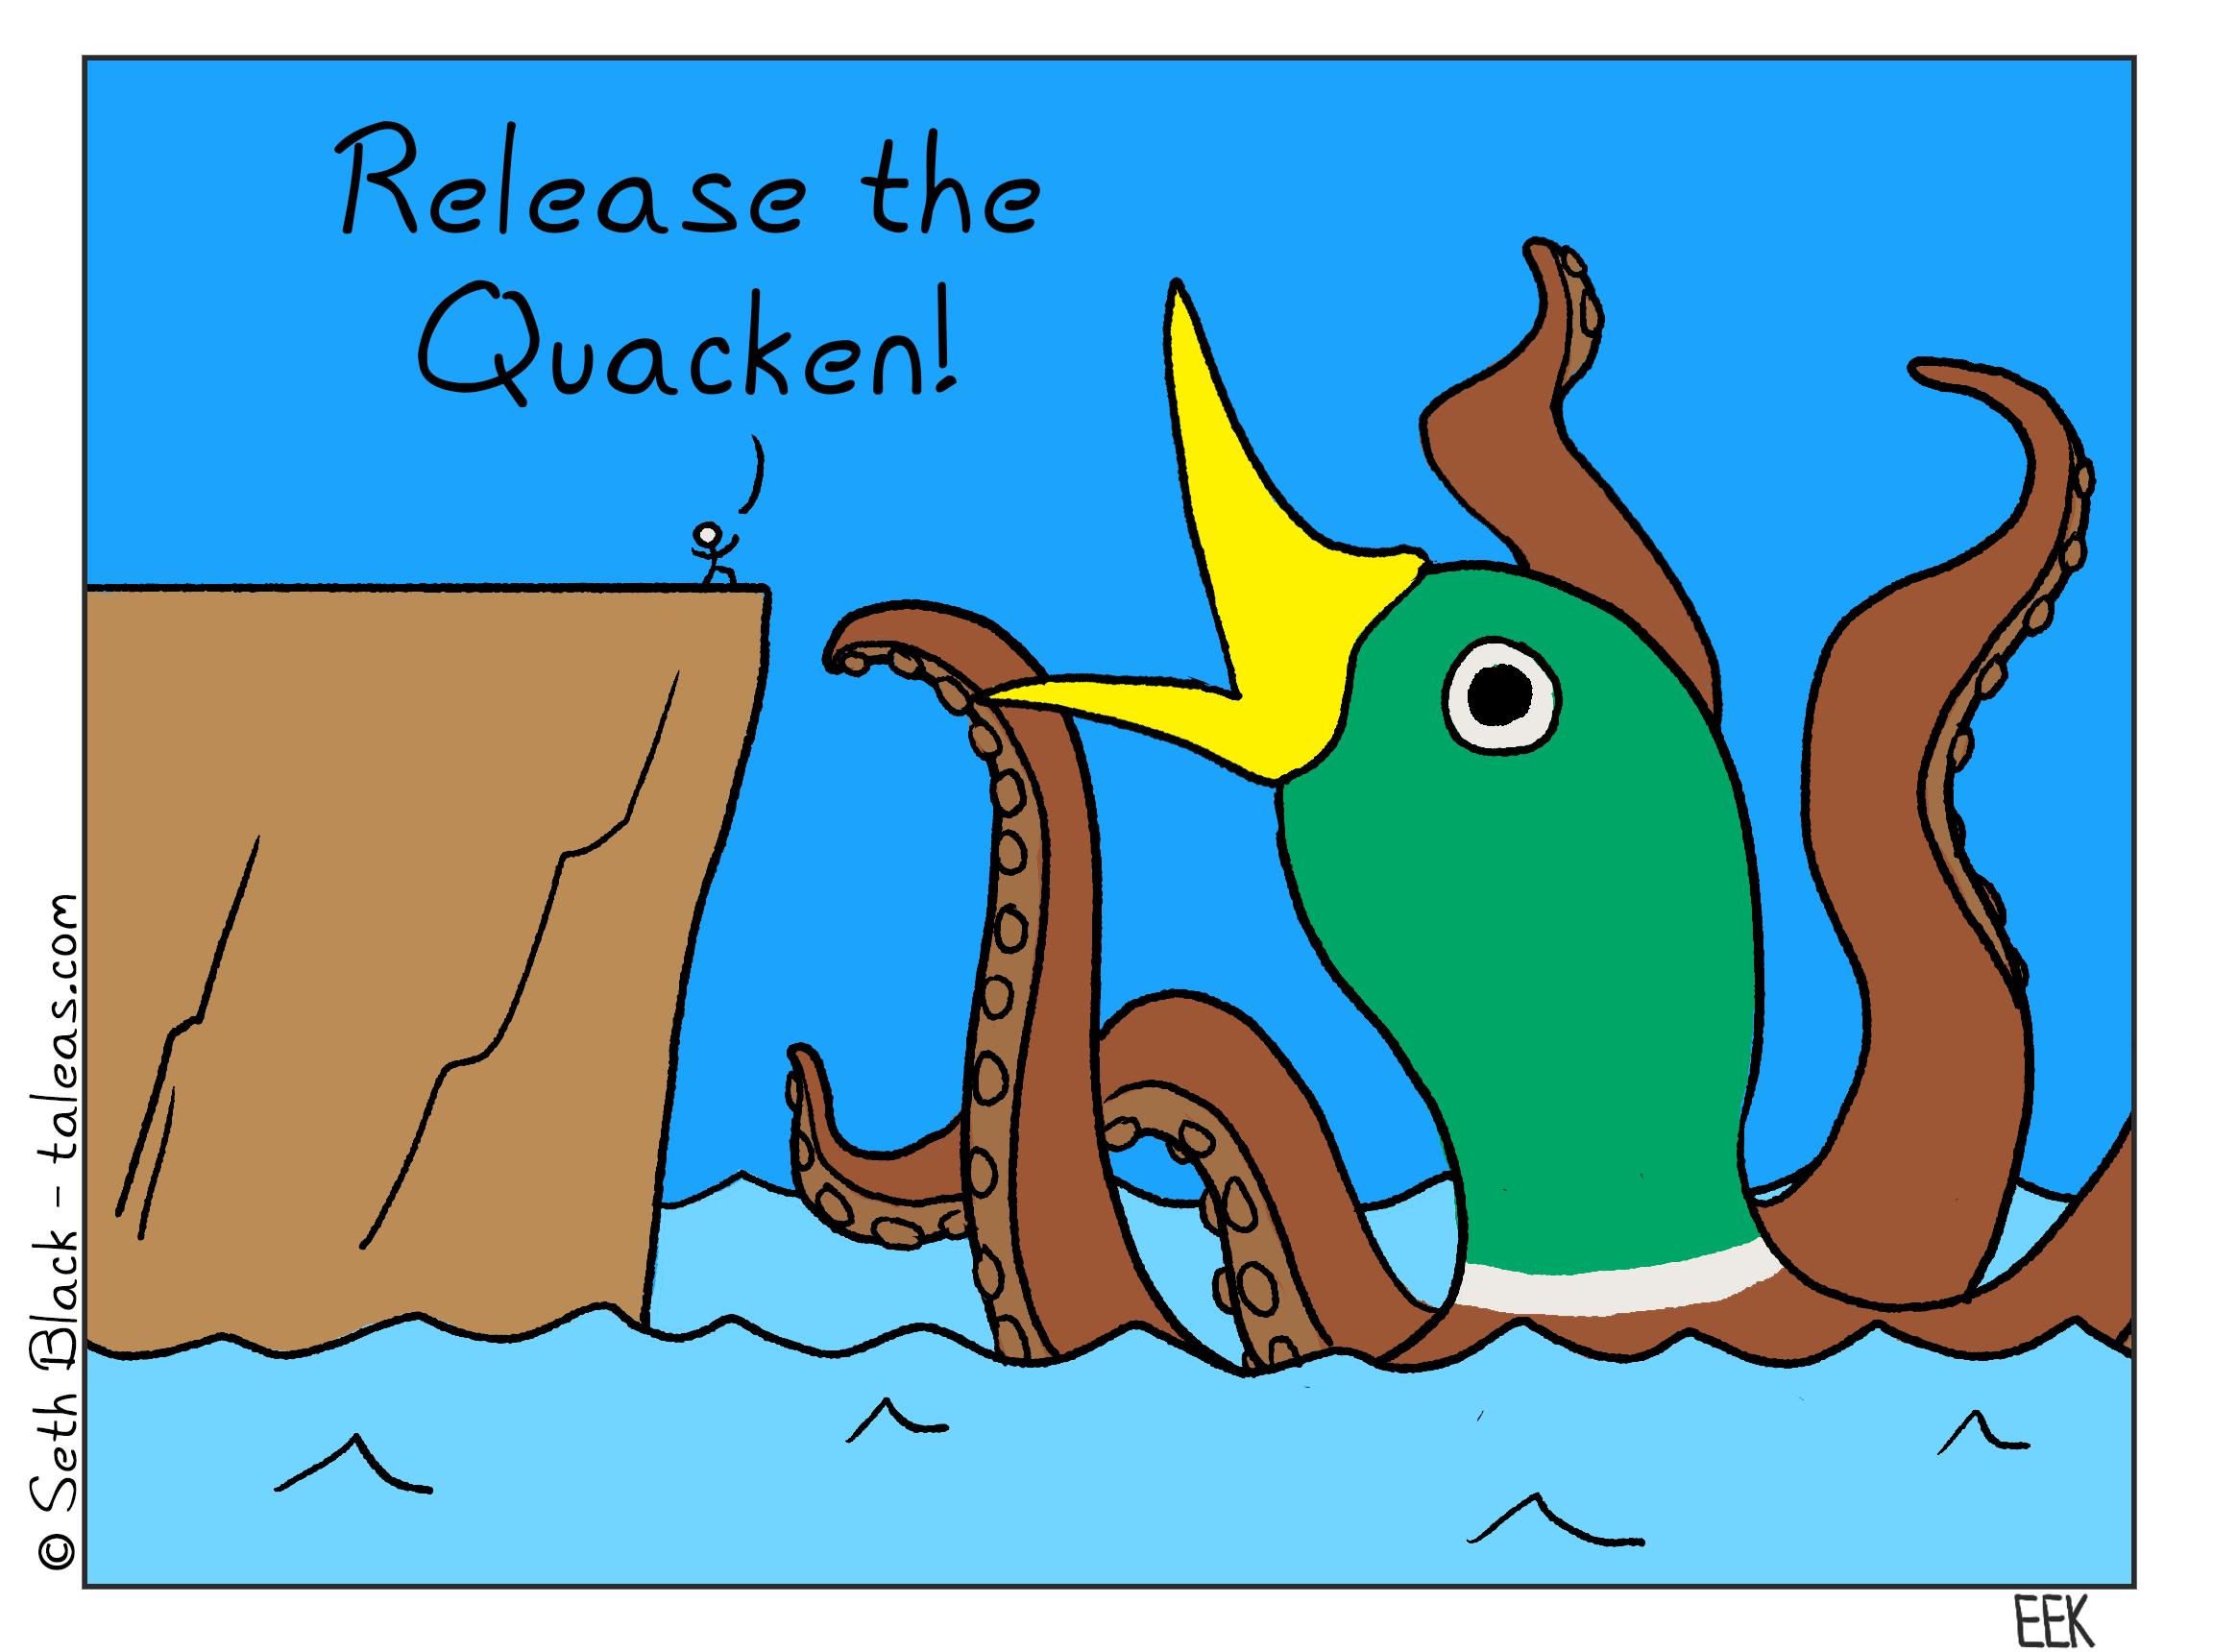 A person standing on a large cliff summons The Quacken, a large, monstrous, duck-headed octopus.